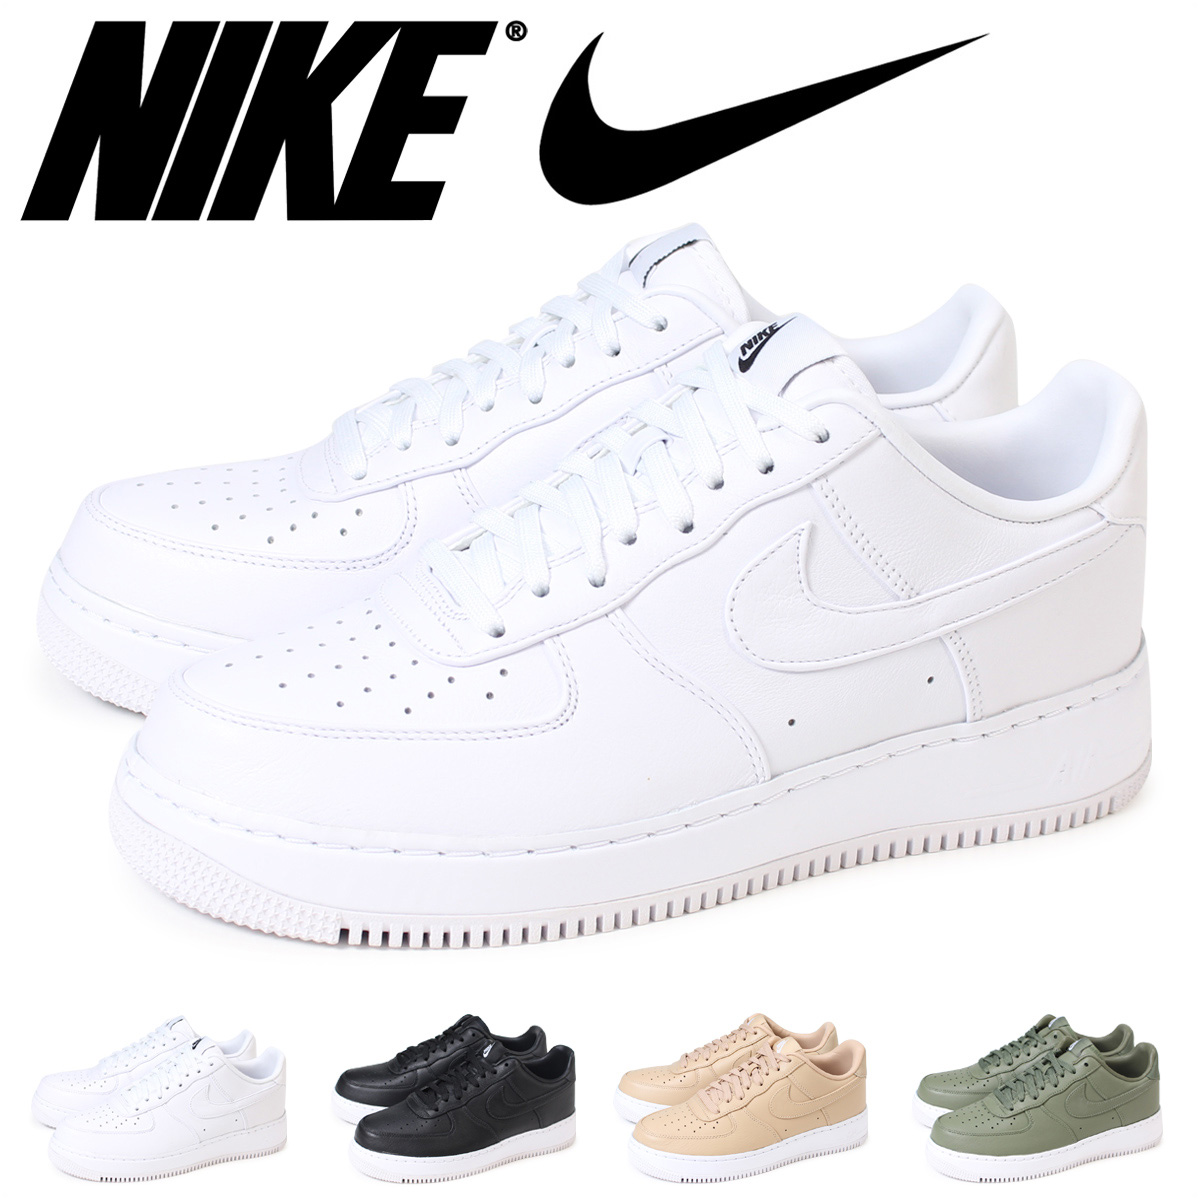 Nike Air Force 1 Low online